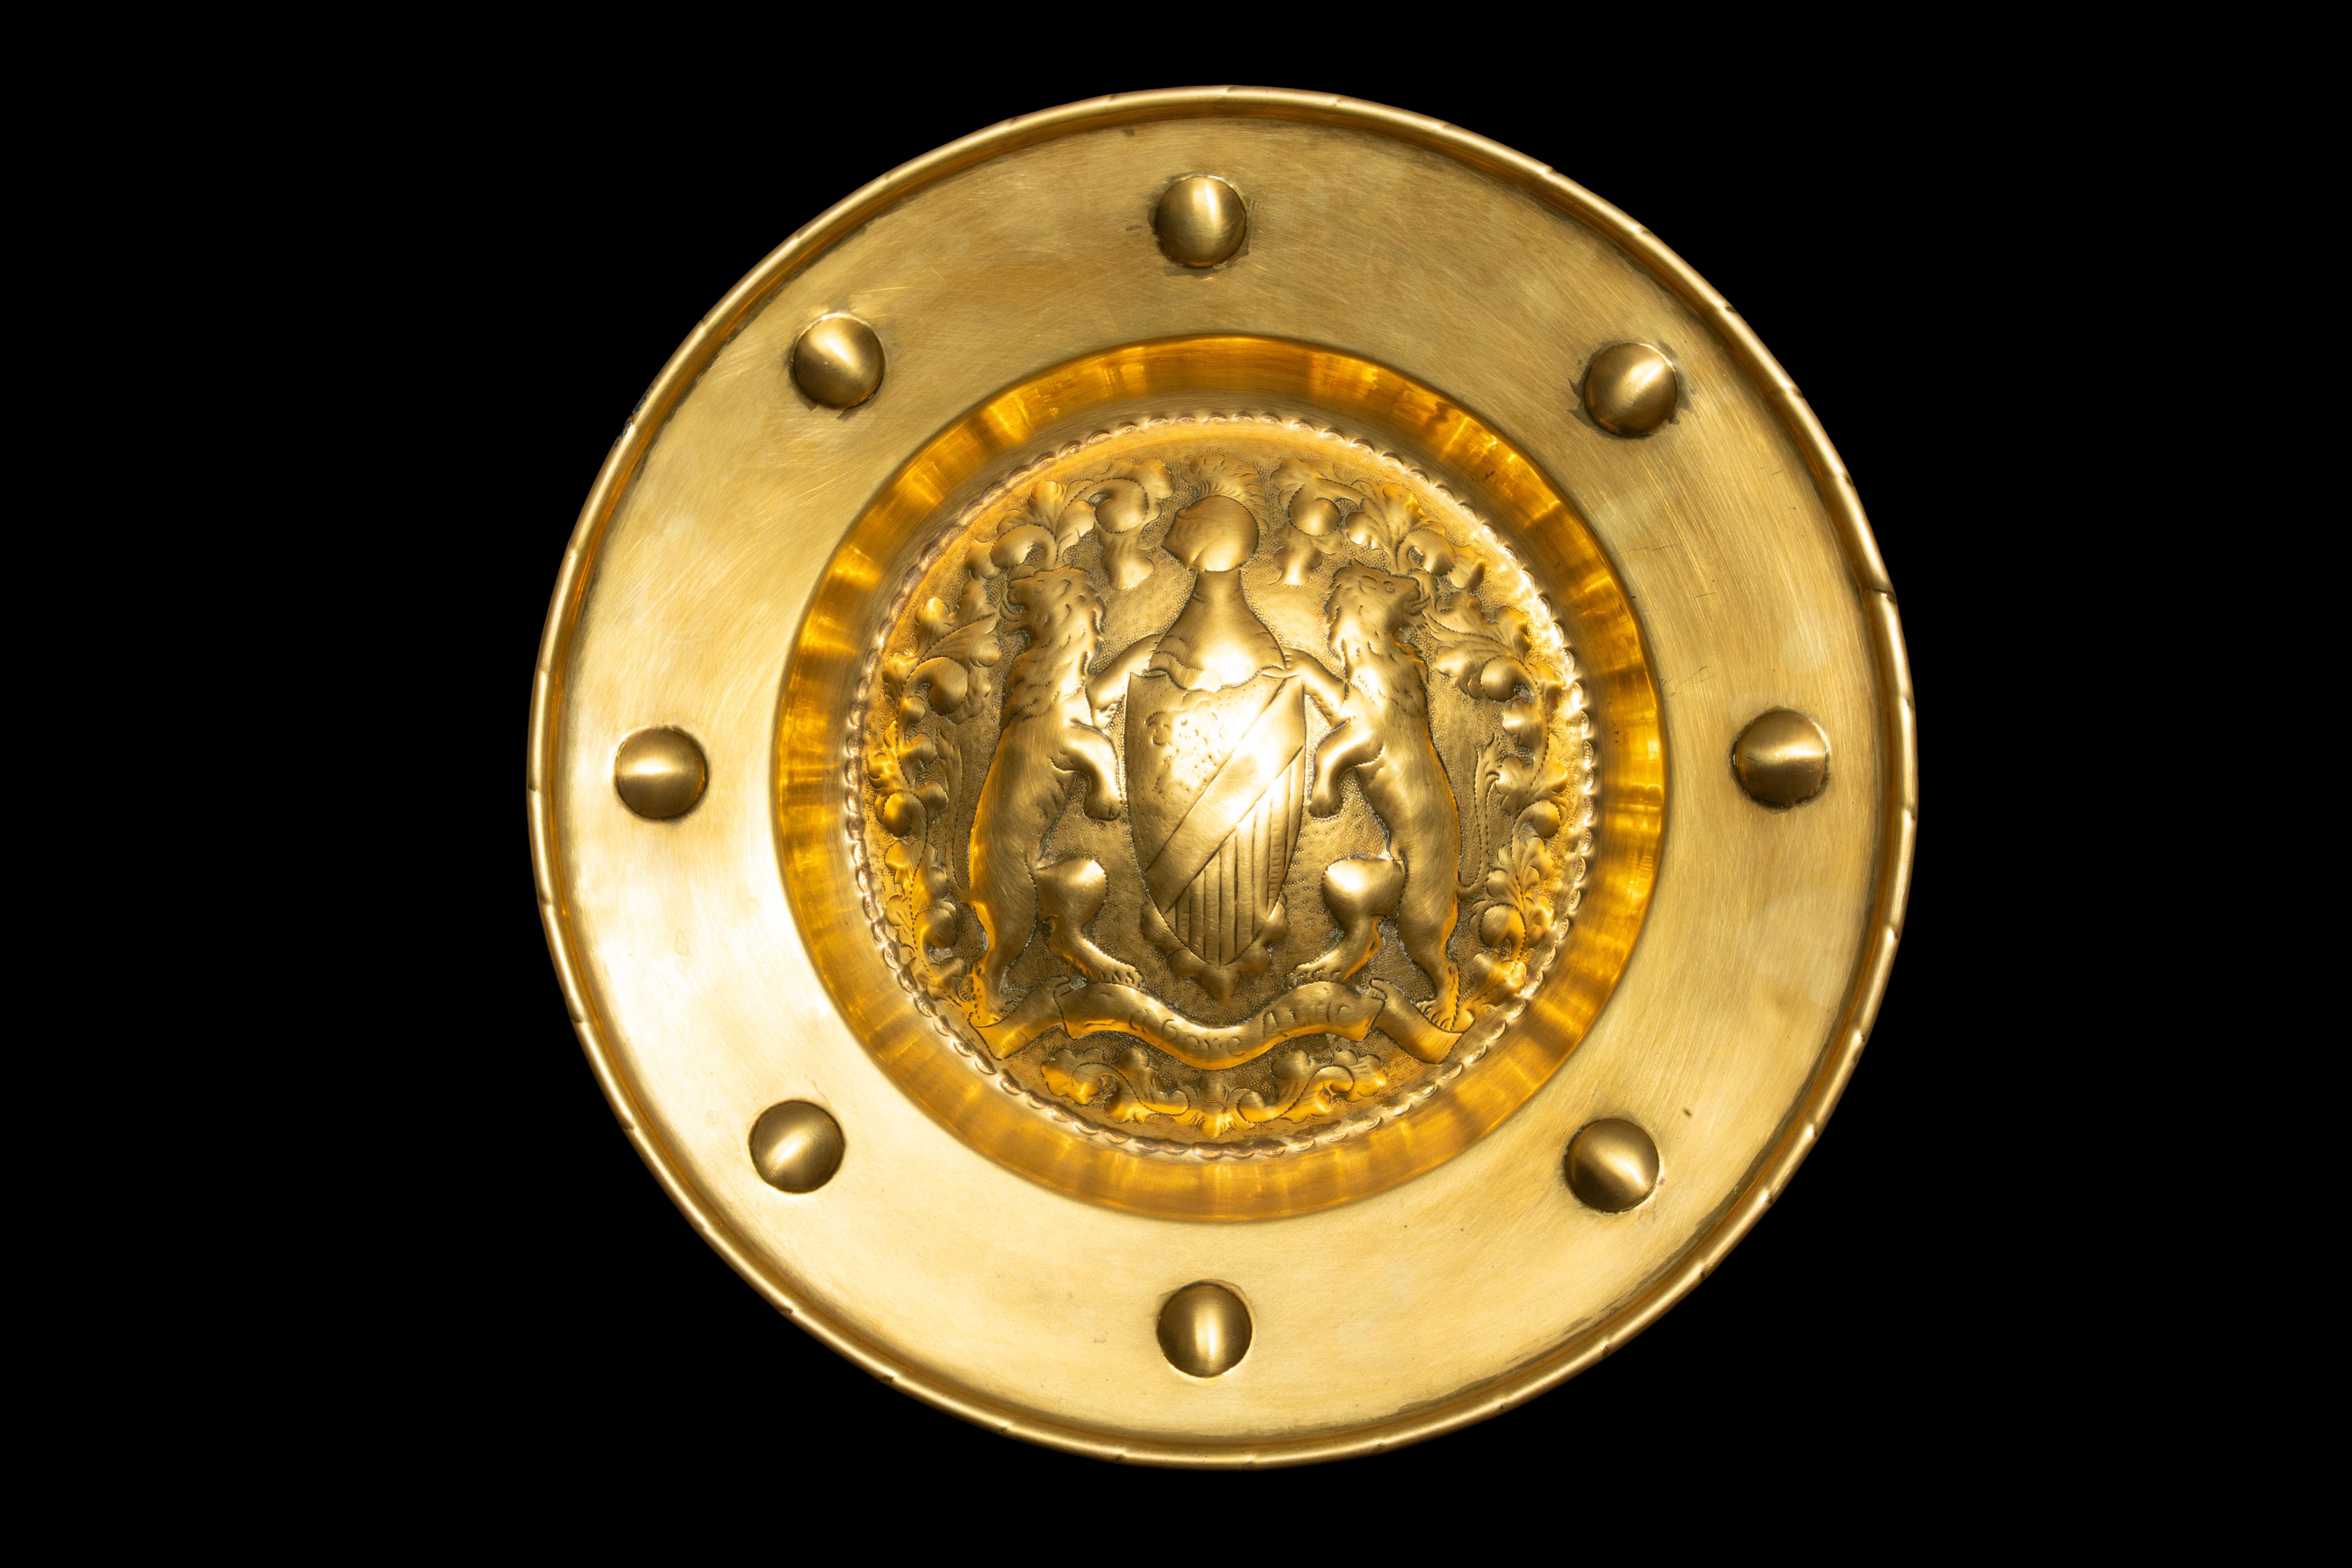 18th Century Ornamental Brass Alms Dish featuring an English coat of arms, measuring approximately 18.25 inches in diameter. This exquisite piece serves as a historic and decorative tray designed for the collection of offerings from congregations.